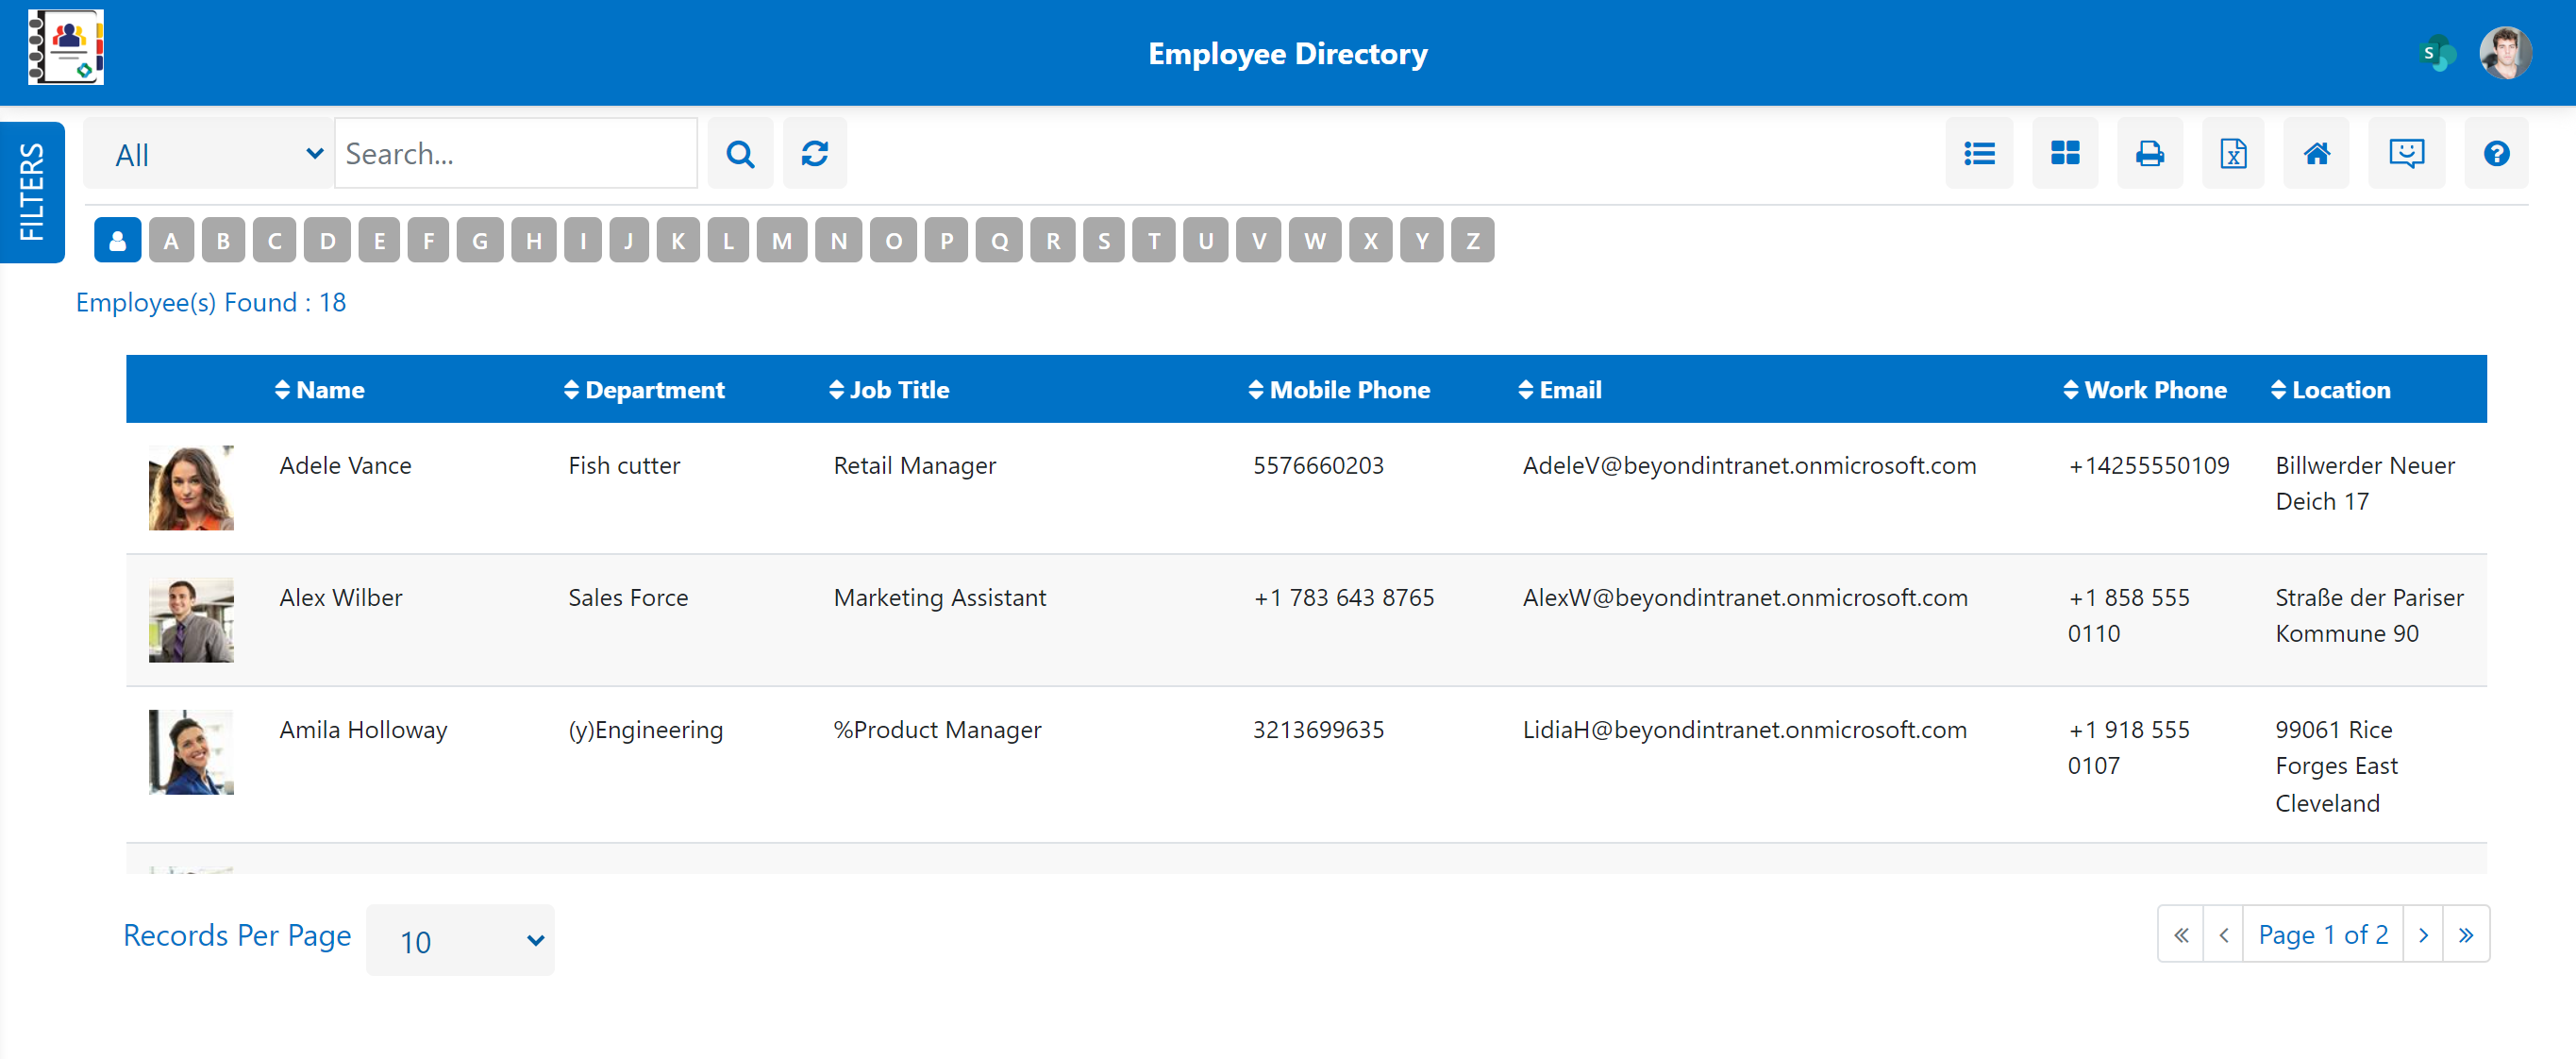 Employee Directory List View